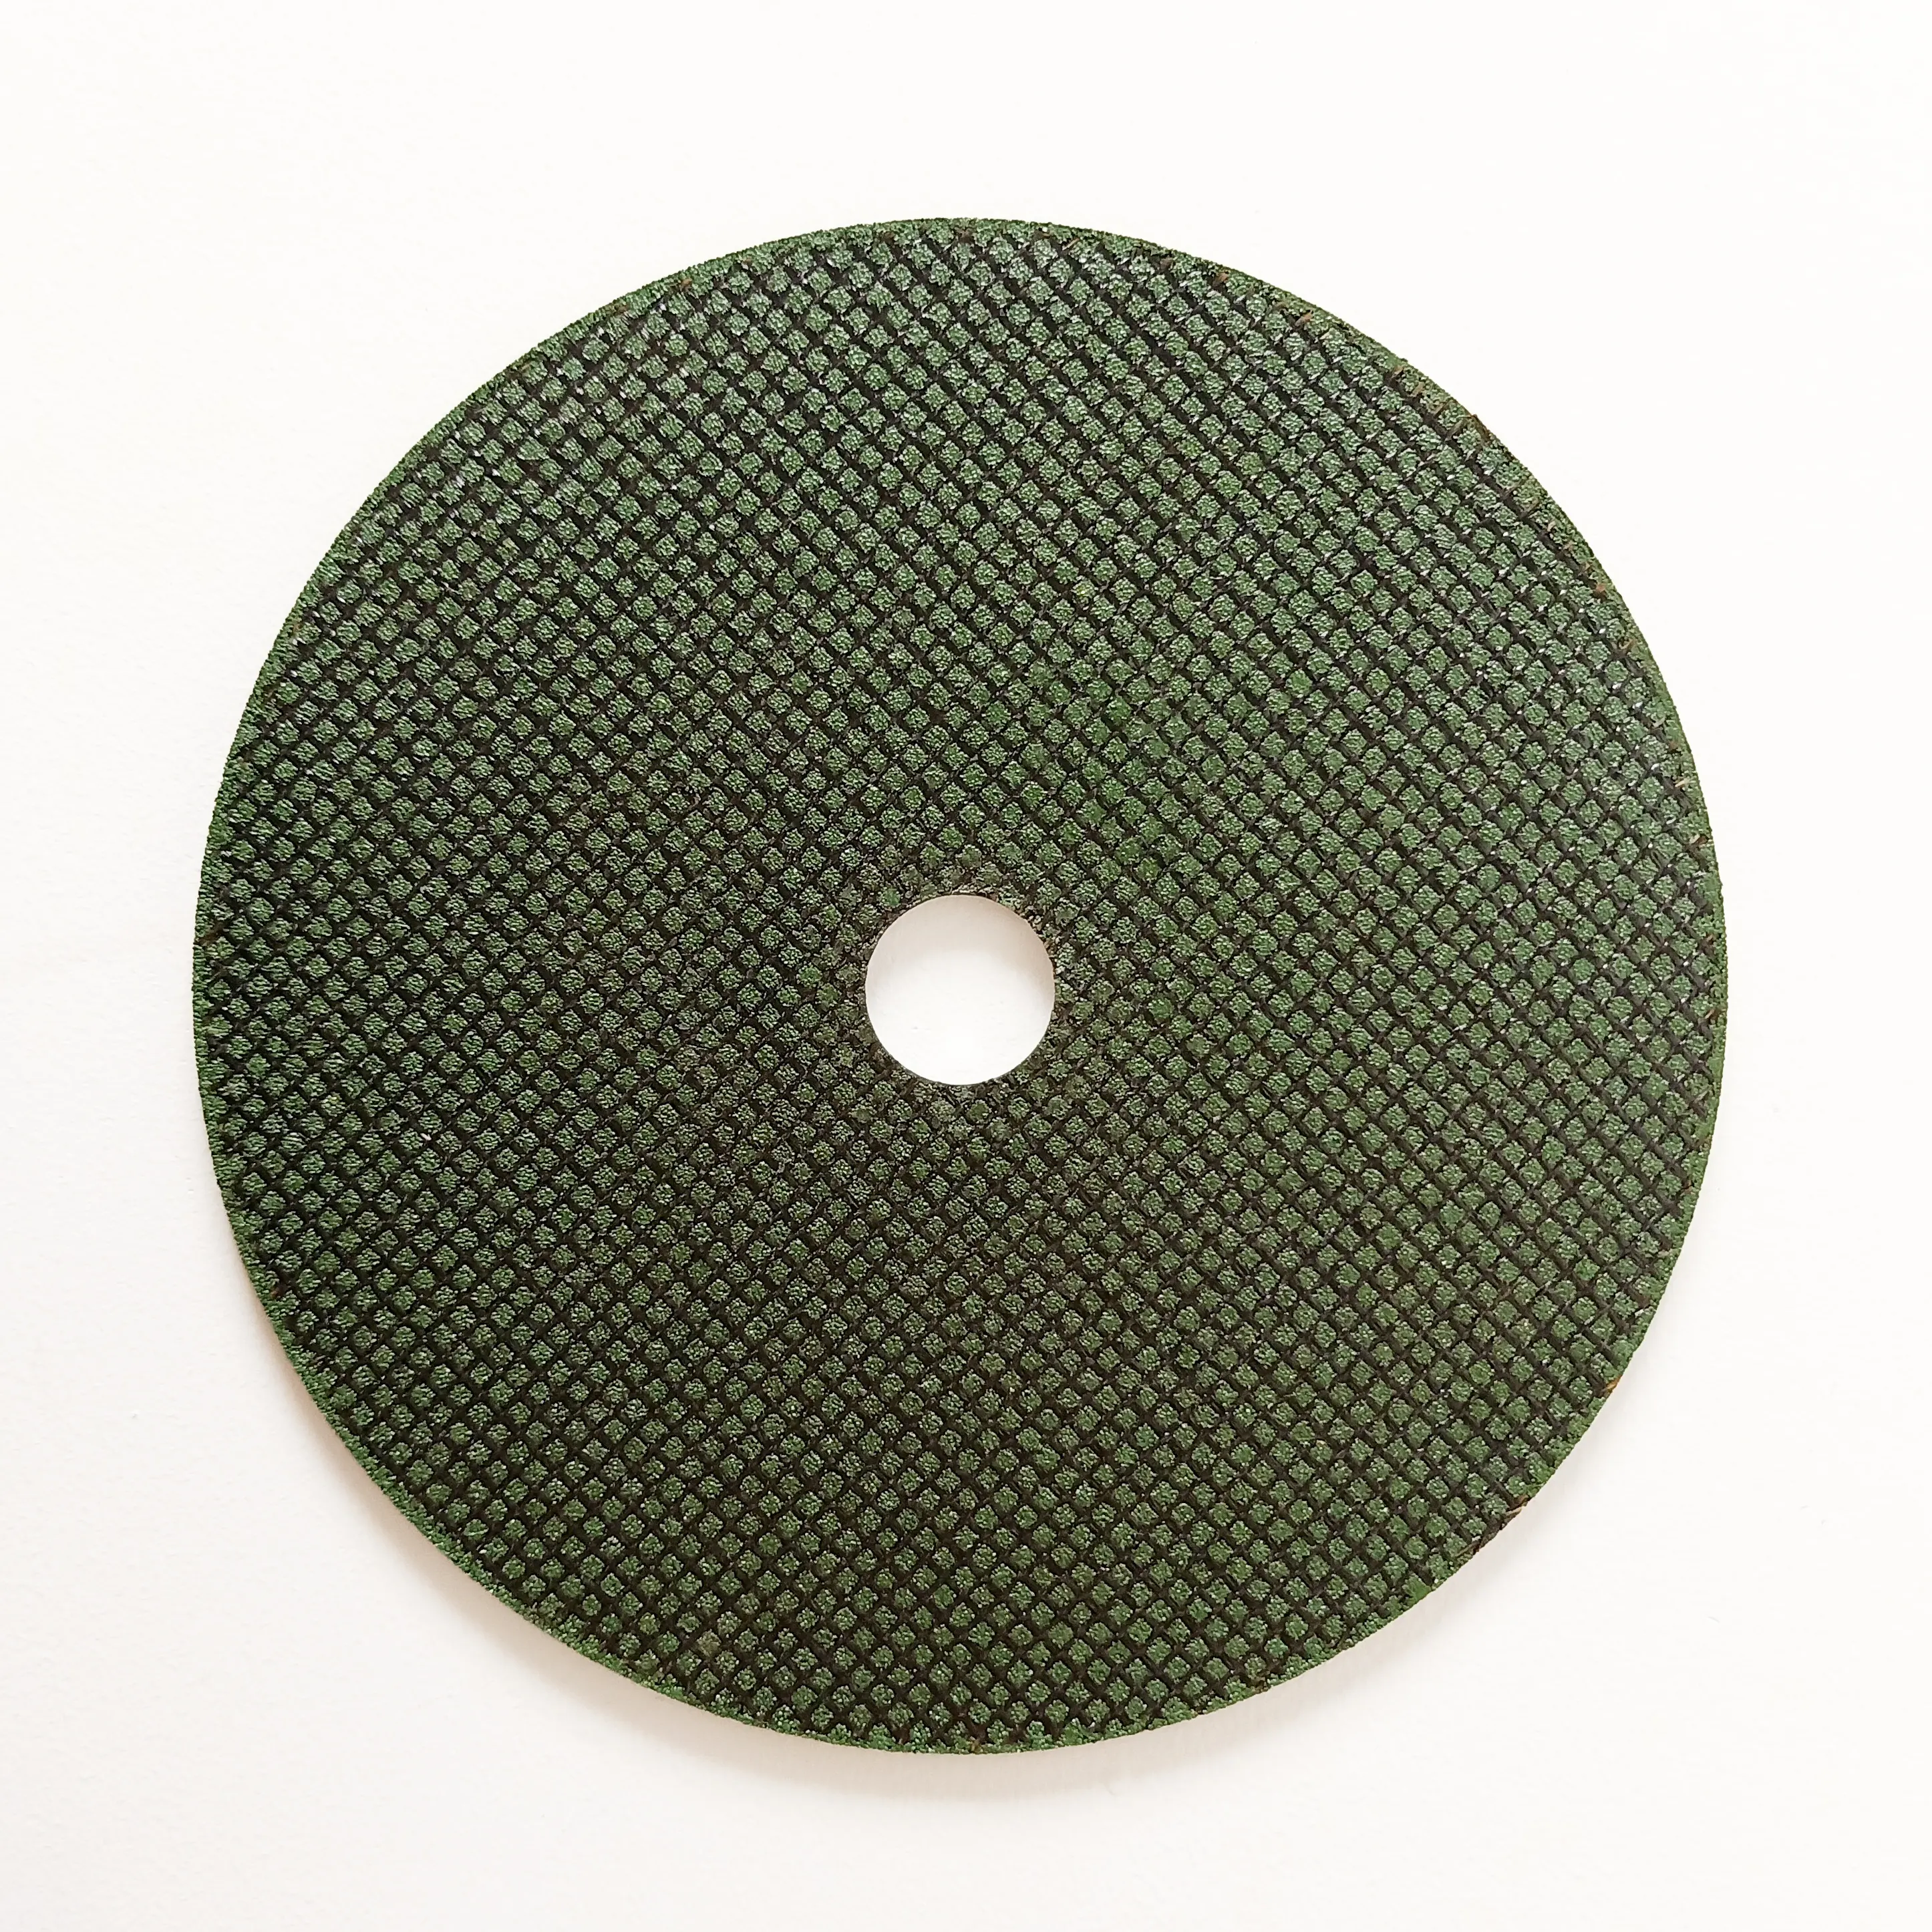 SATC Hot Sale 105mm 4 Inch 1.2mm Cutting Wheel Grinding and Cutting Disc Abrasive DISC for Metal Stainless Steel